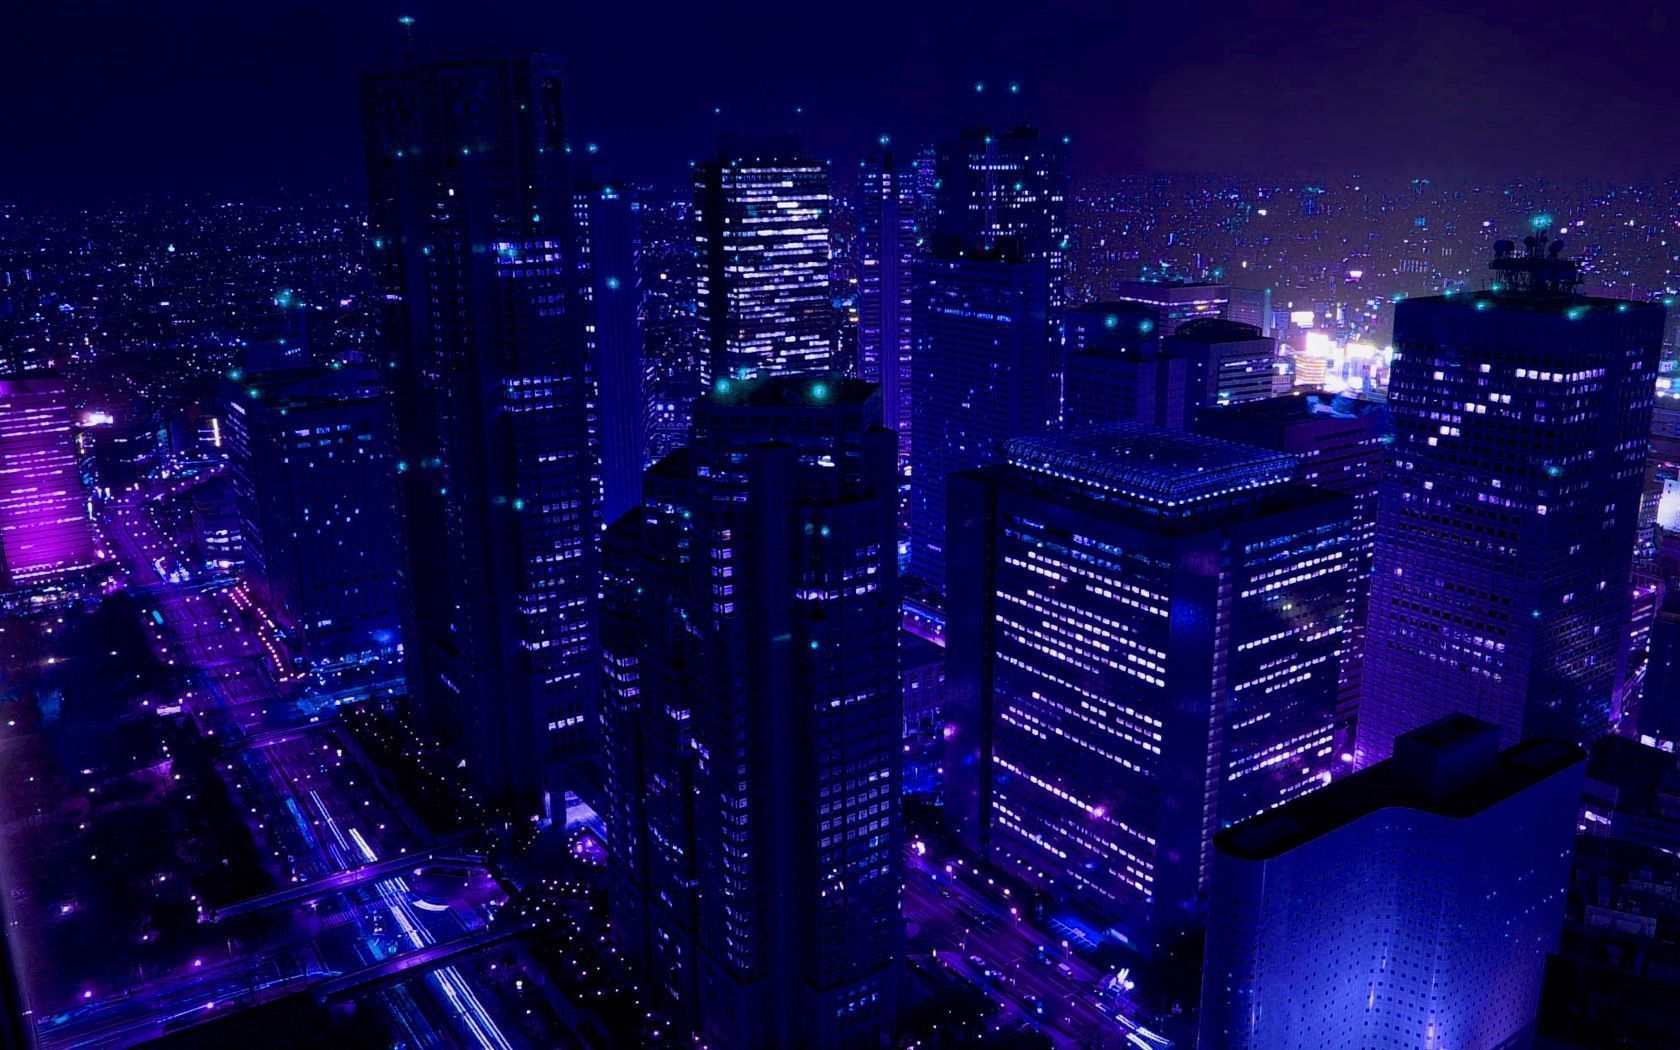 A purple and blue city at night with skyscrapers - Desktop, cityscape, city, night, anime city, skyline